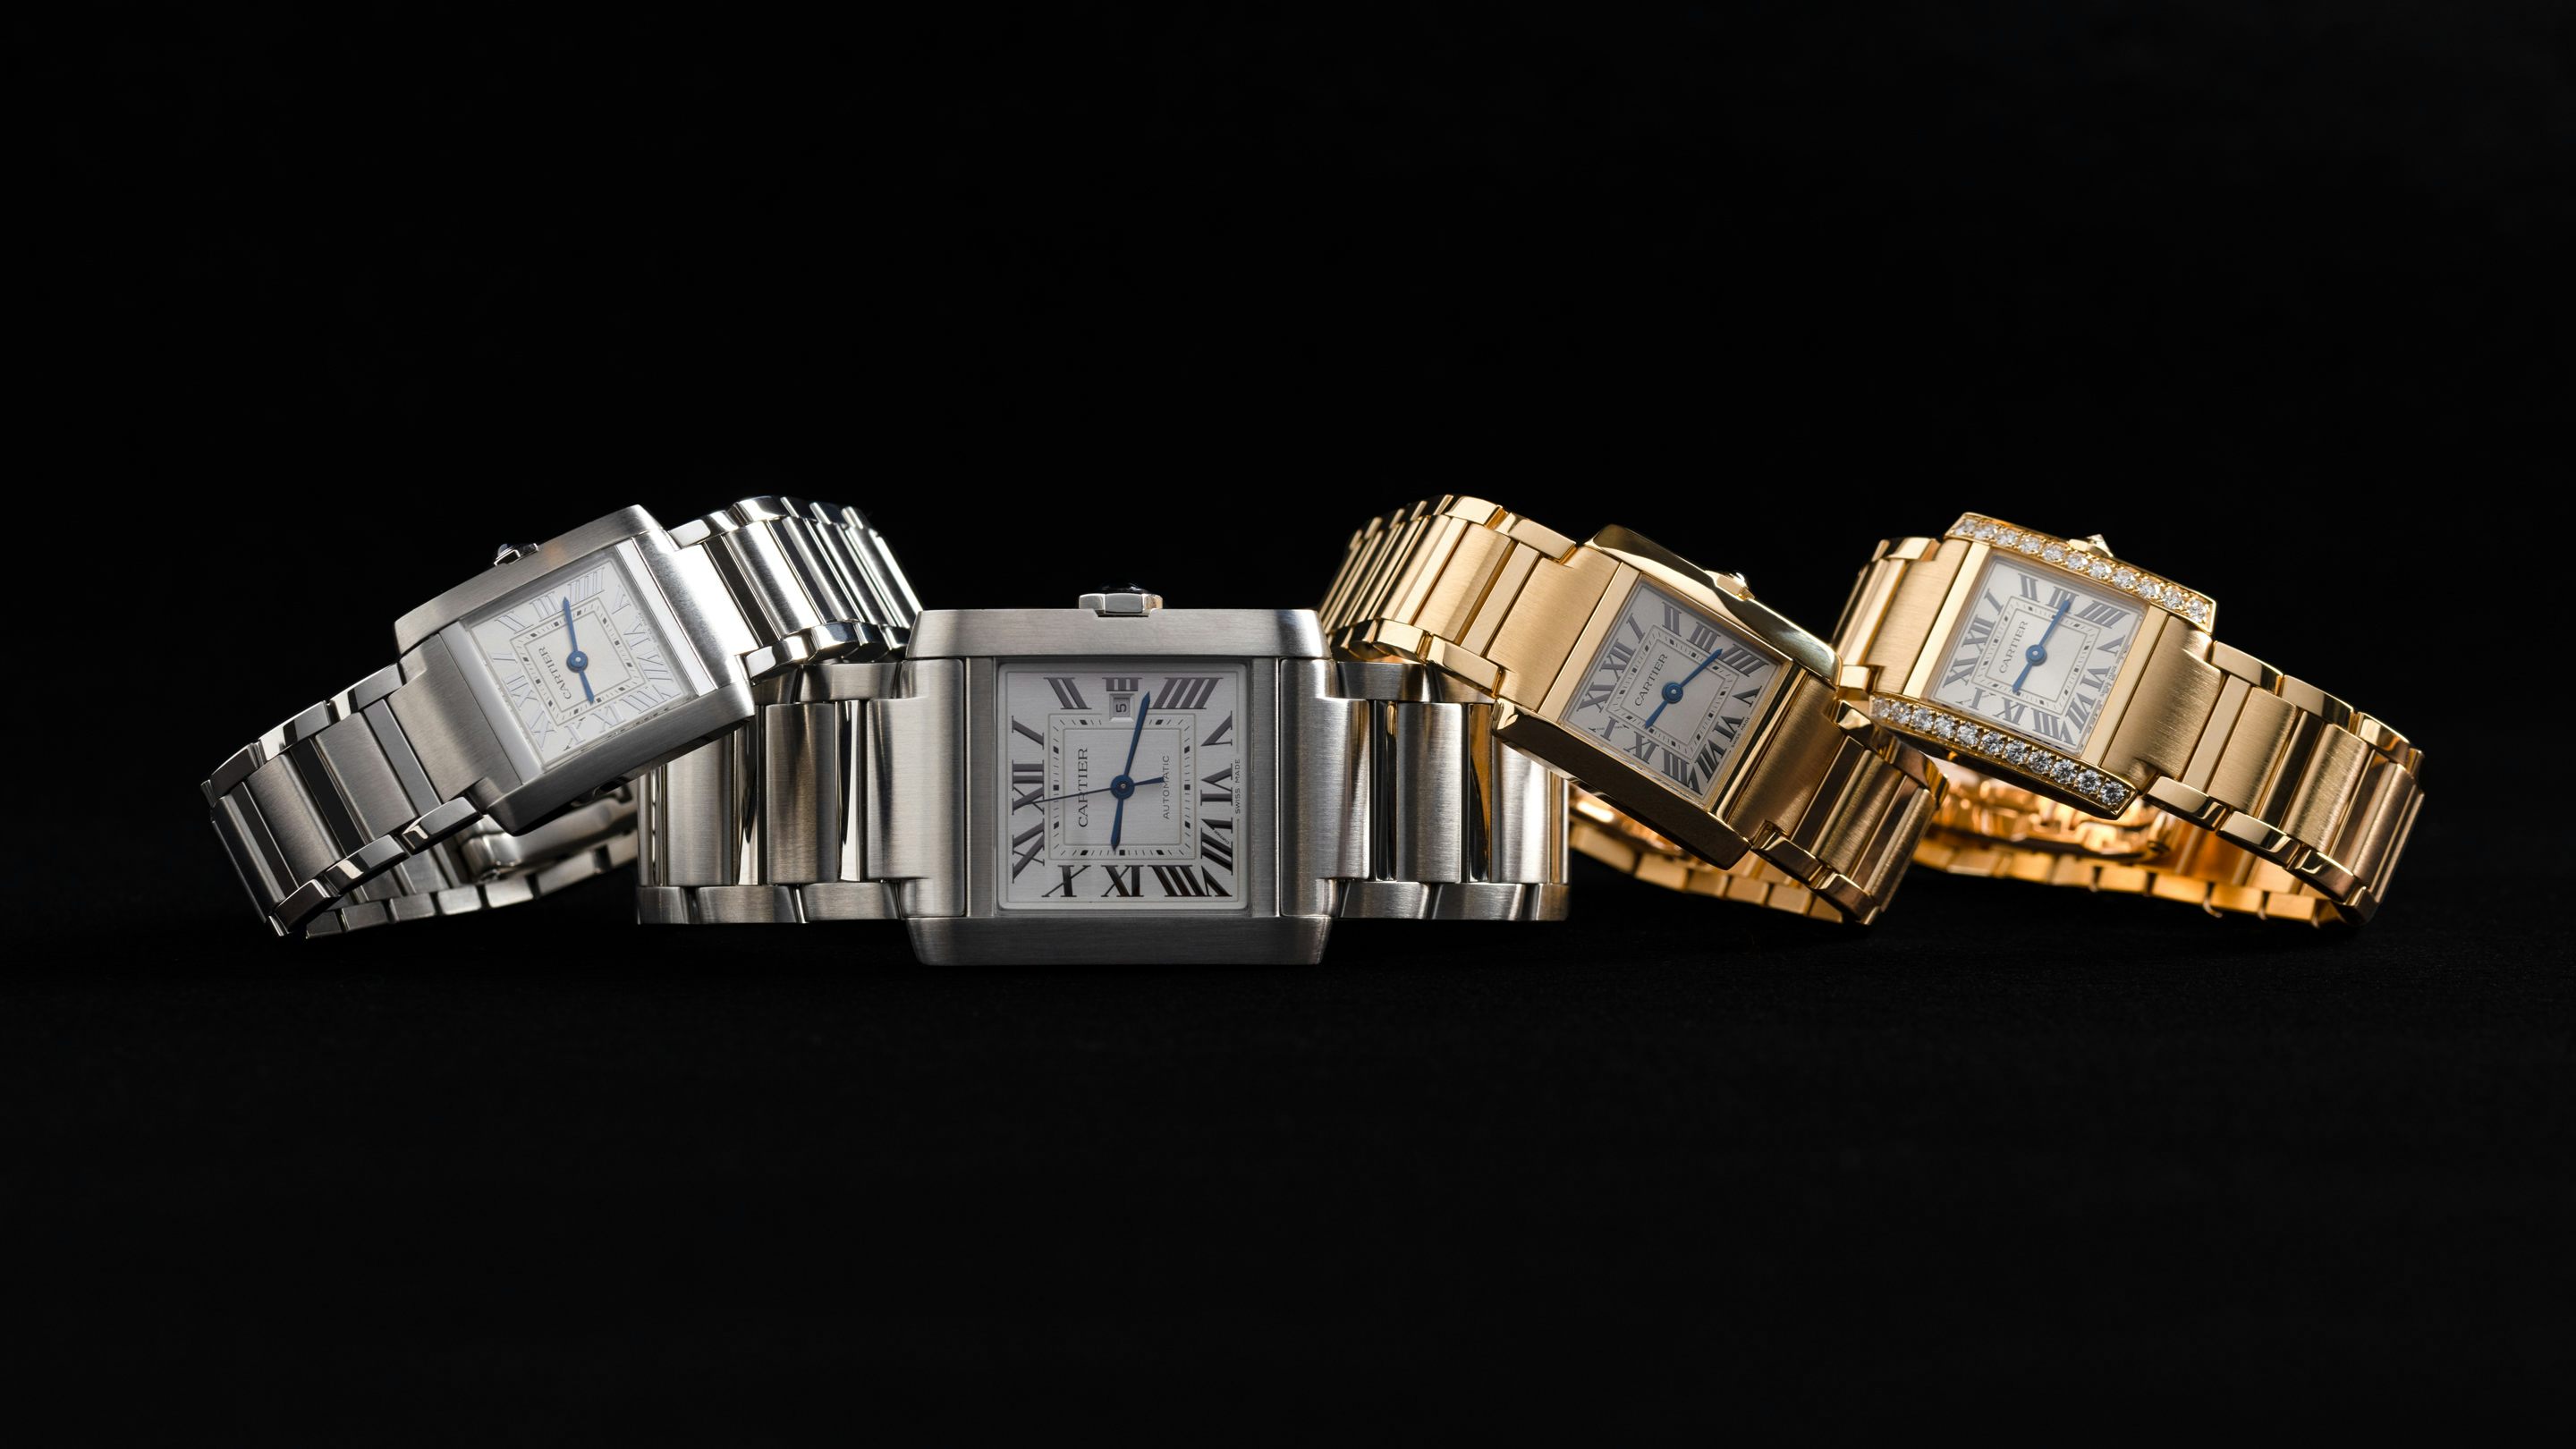 Cartier Tank - Watches and Wonders 2023 - Loupiosity.com in 2023